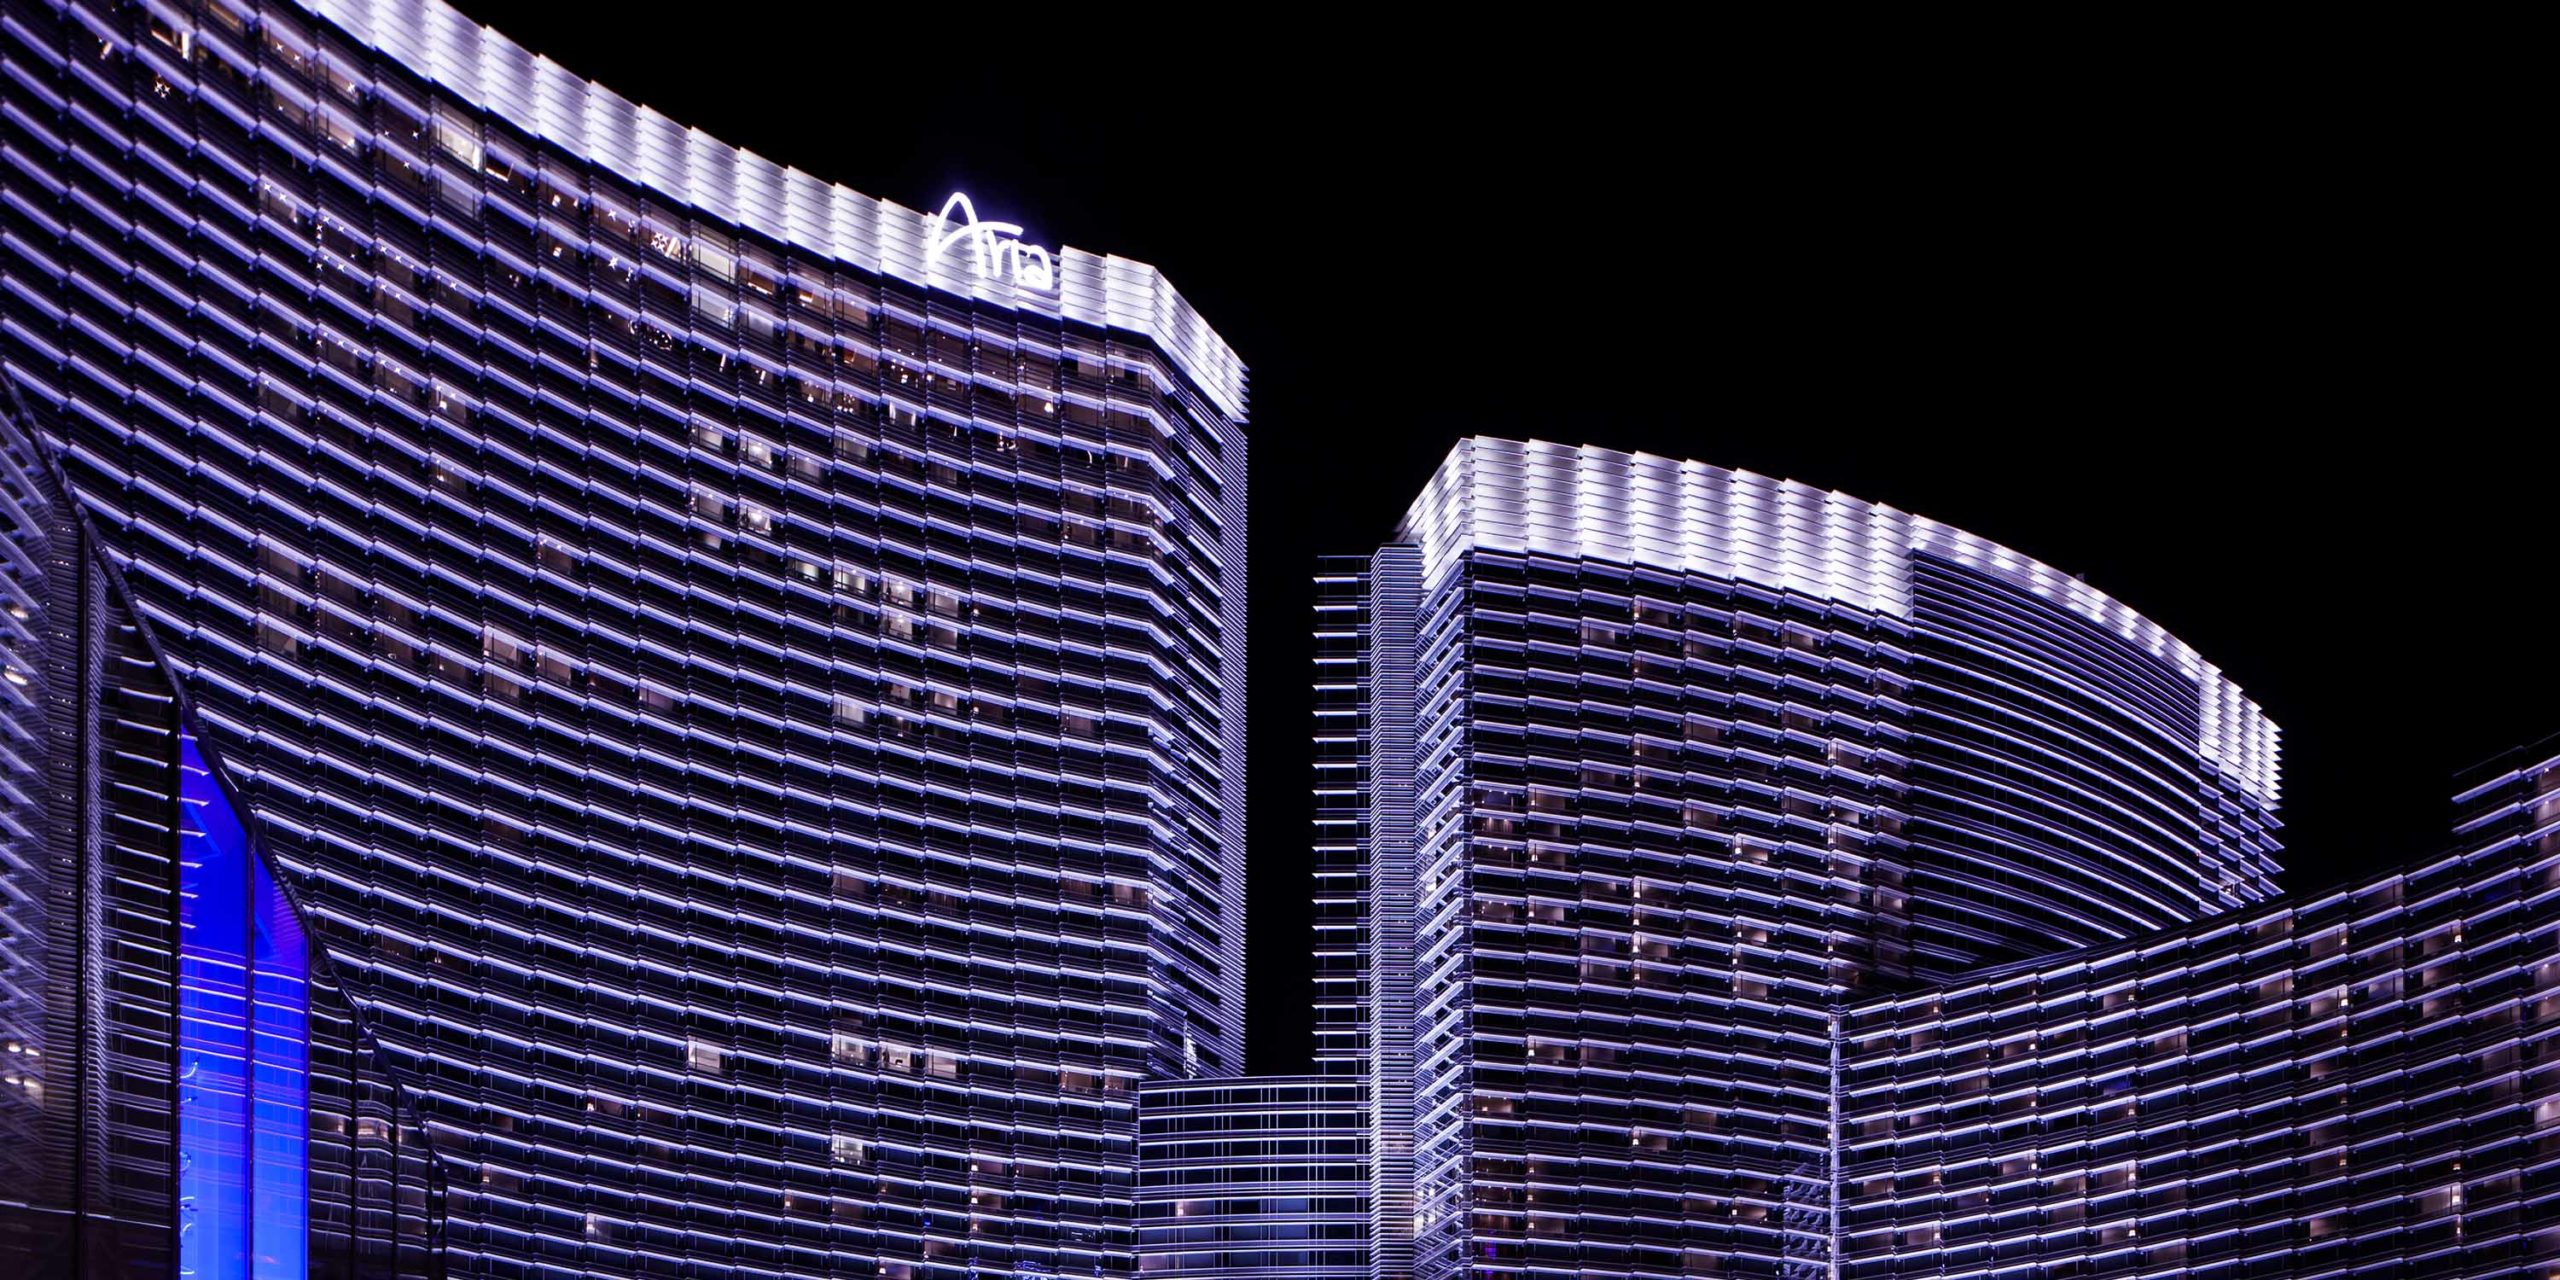 Project Image for MGM CityCenter: Aria Resort & Casino